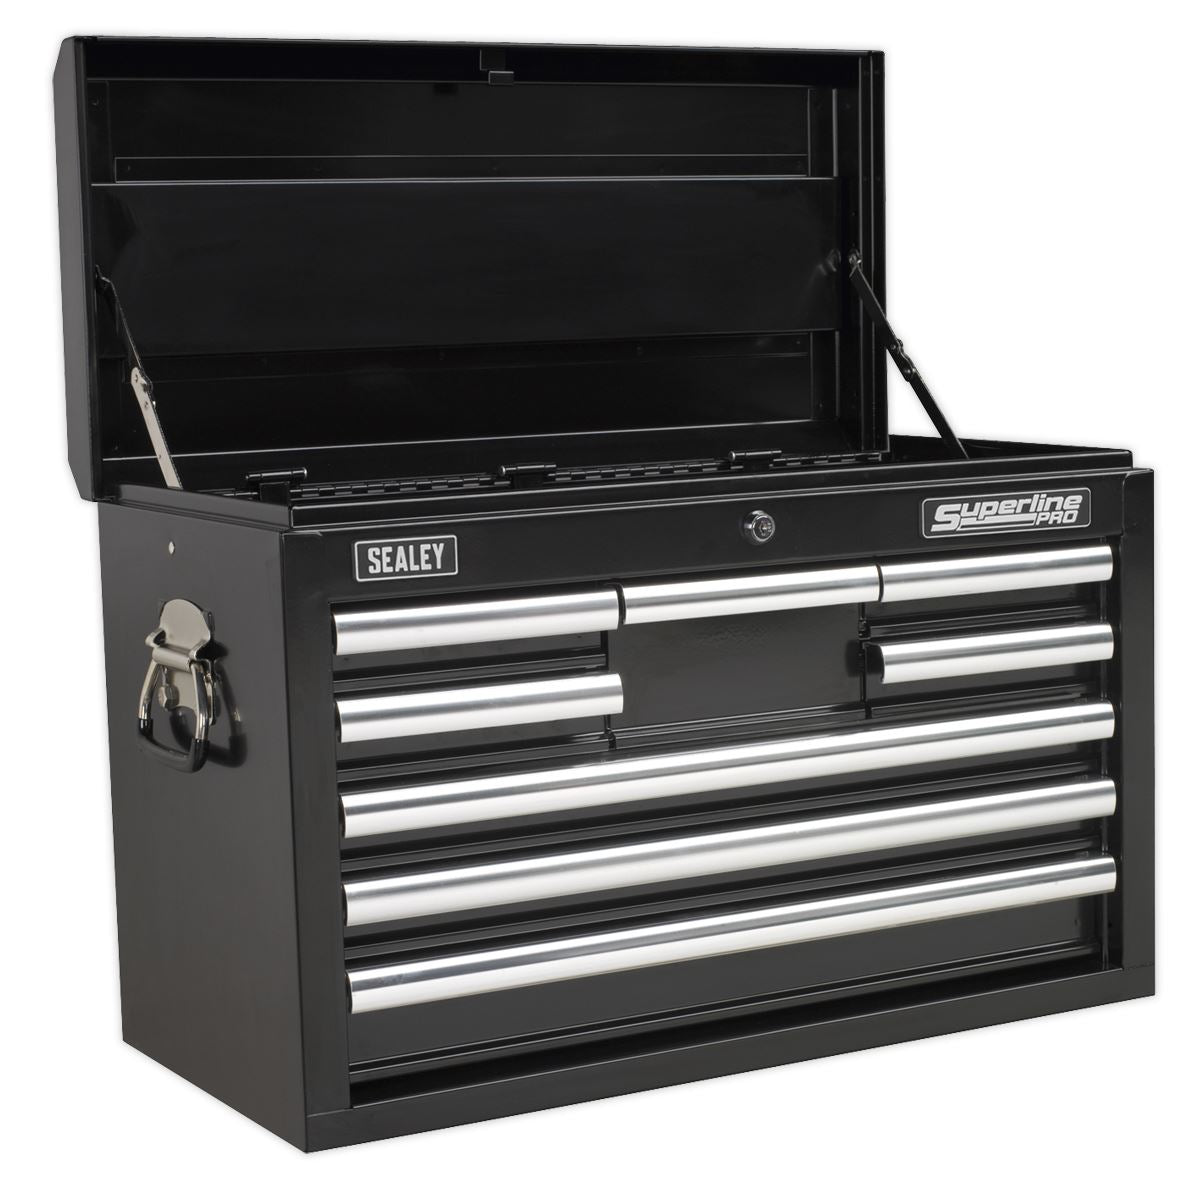 Sealey Superline Pro Topchest 8 Drawer with Ball-Bearing Slides - Black